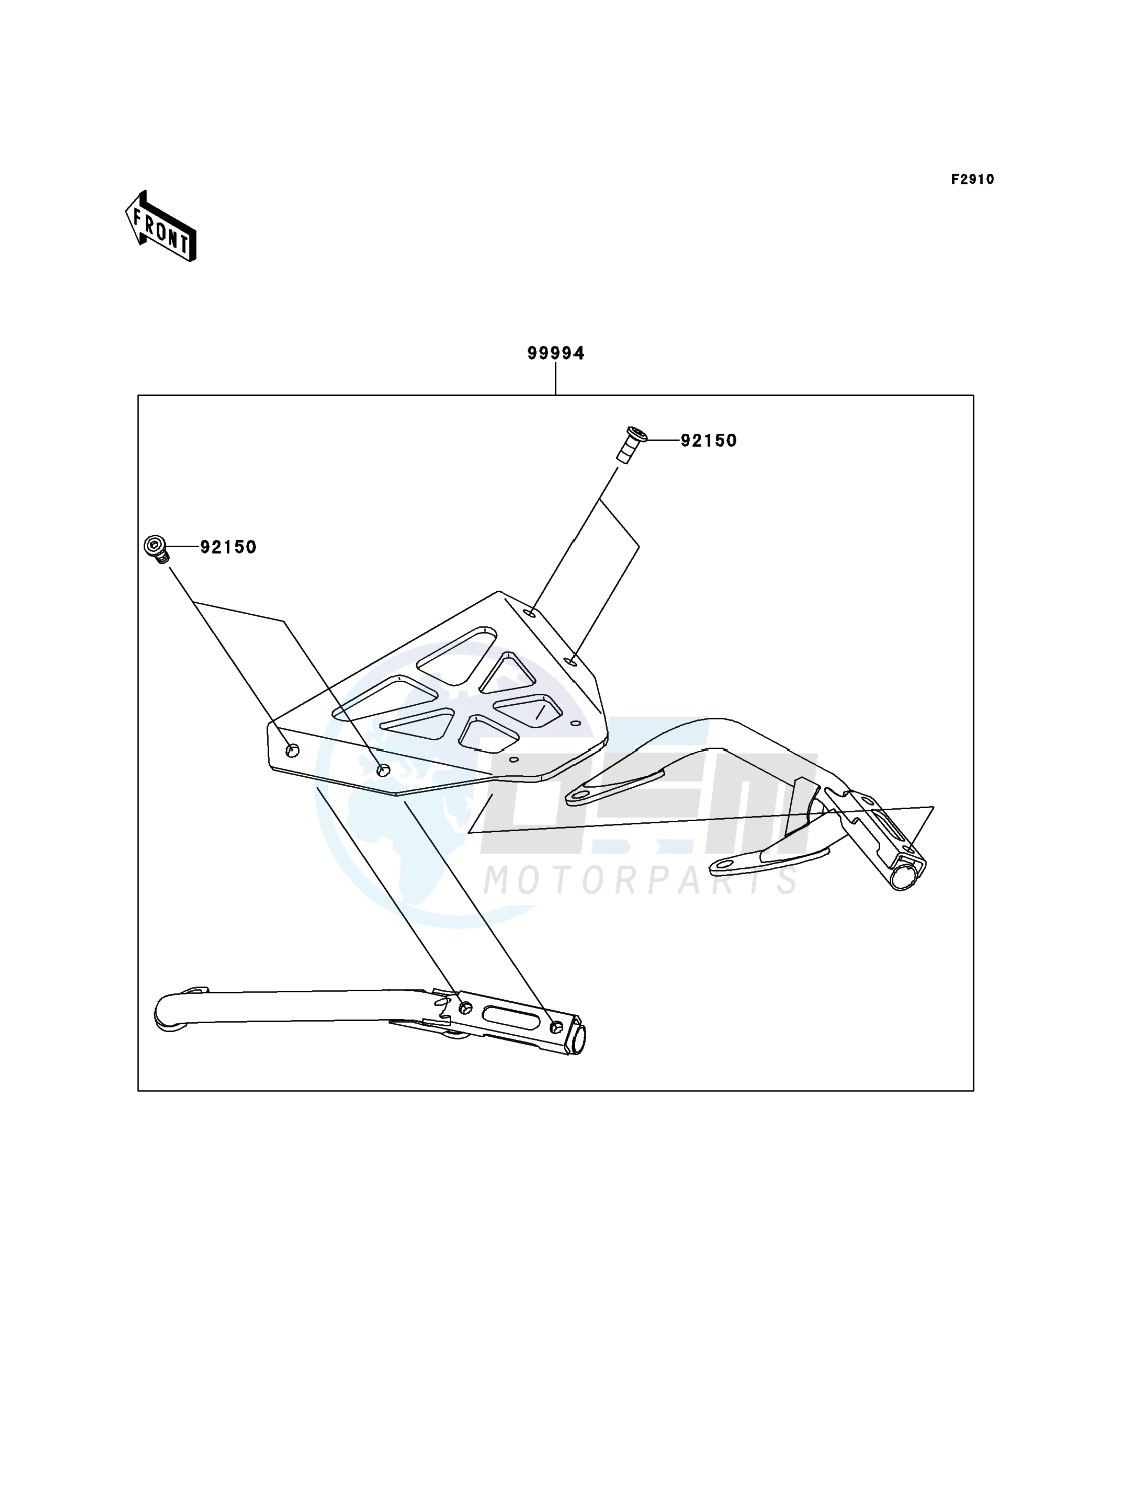 Accessory(Top Case Stay) blueprint